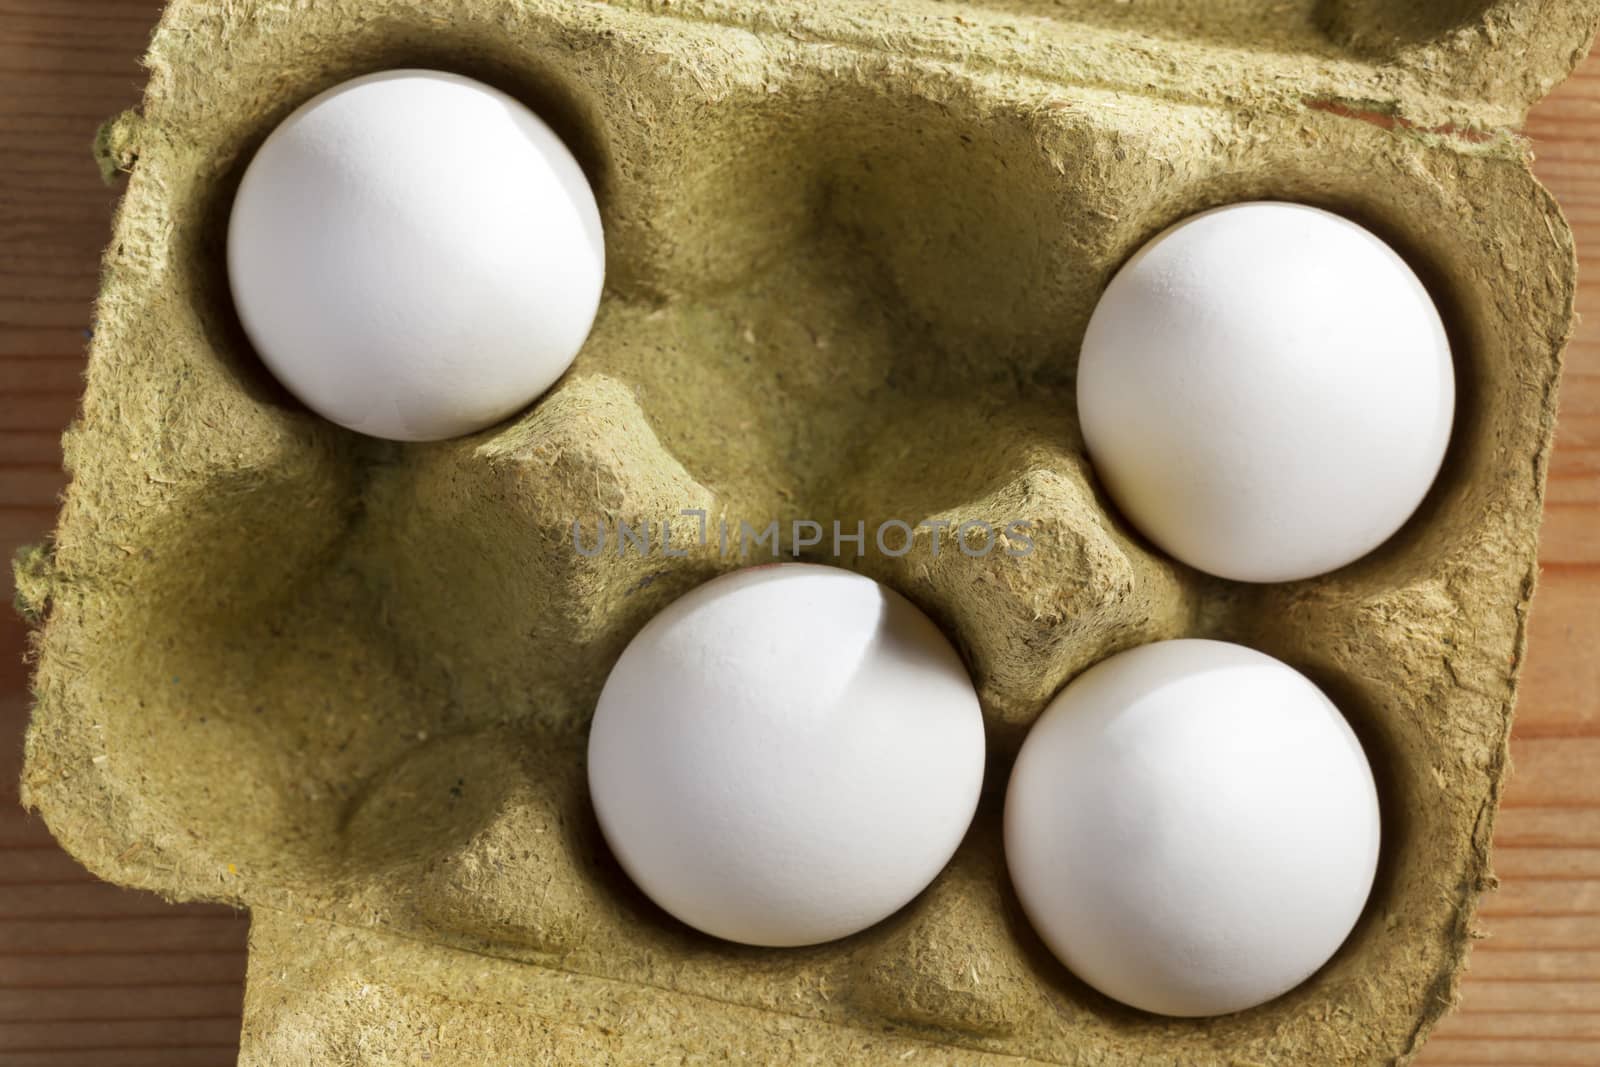 Four organic eggs in a box made of grass by kievith